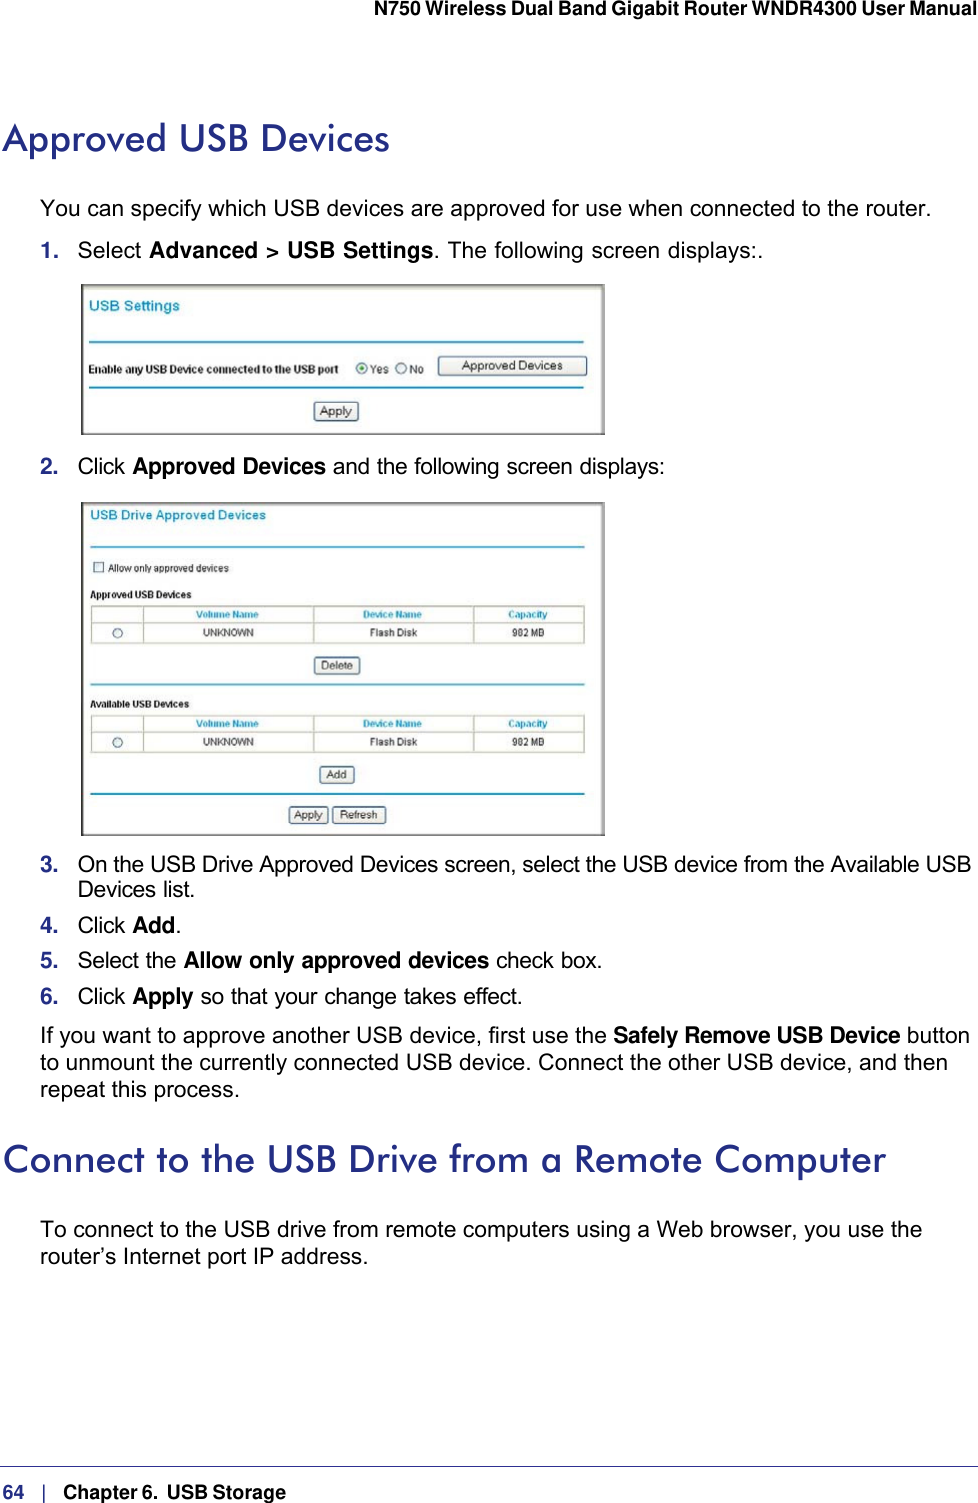 64   |   Chapter 6.  USB Storage  N750 Wireless Dual Band Gigabit Router WNDR4300 User Manual Approved USB DevicesYou can specify which USB devices are approved for use when connected to the router.1.  Select Advanced &gt; USB Settings. The following screen displays:. 2.  Click Approved Devices and the following screen displays: 3.  On the USB Drive Approved Devices screen, select the USB device from the Available USB Devices list.4.  Click Add.5.  Select the Allow only approved devices check box.6.  Click Apply so that your change takes effect.If you want to approve another USB device, first use the Safely Remove USB Device button to unmount the currently connected USB device. Connect the other USB device, and then repeat this process.Connect to the USB Drive from a Remote ComputerTo connect to the USB drive from remote computers using a Web browser, you use the router’s Internet port IP address.